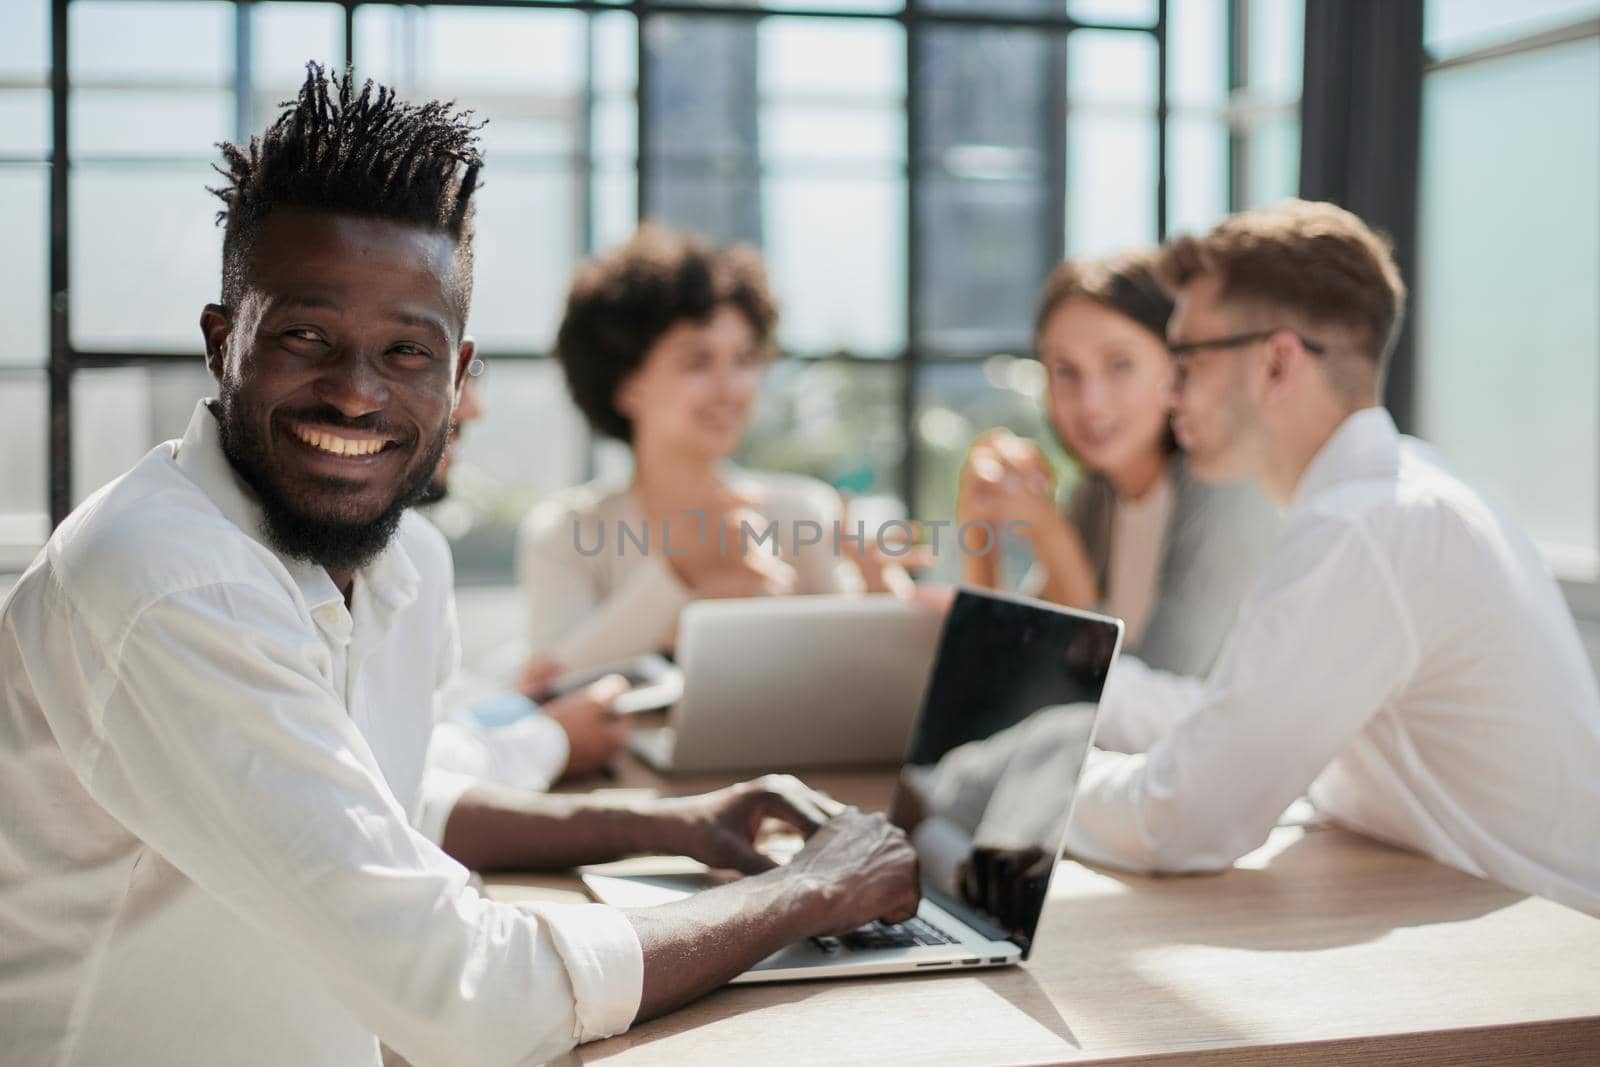 Portrait of smiling African American business man with executives working on laptop in background.